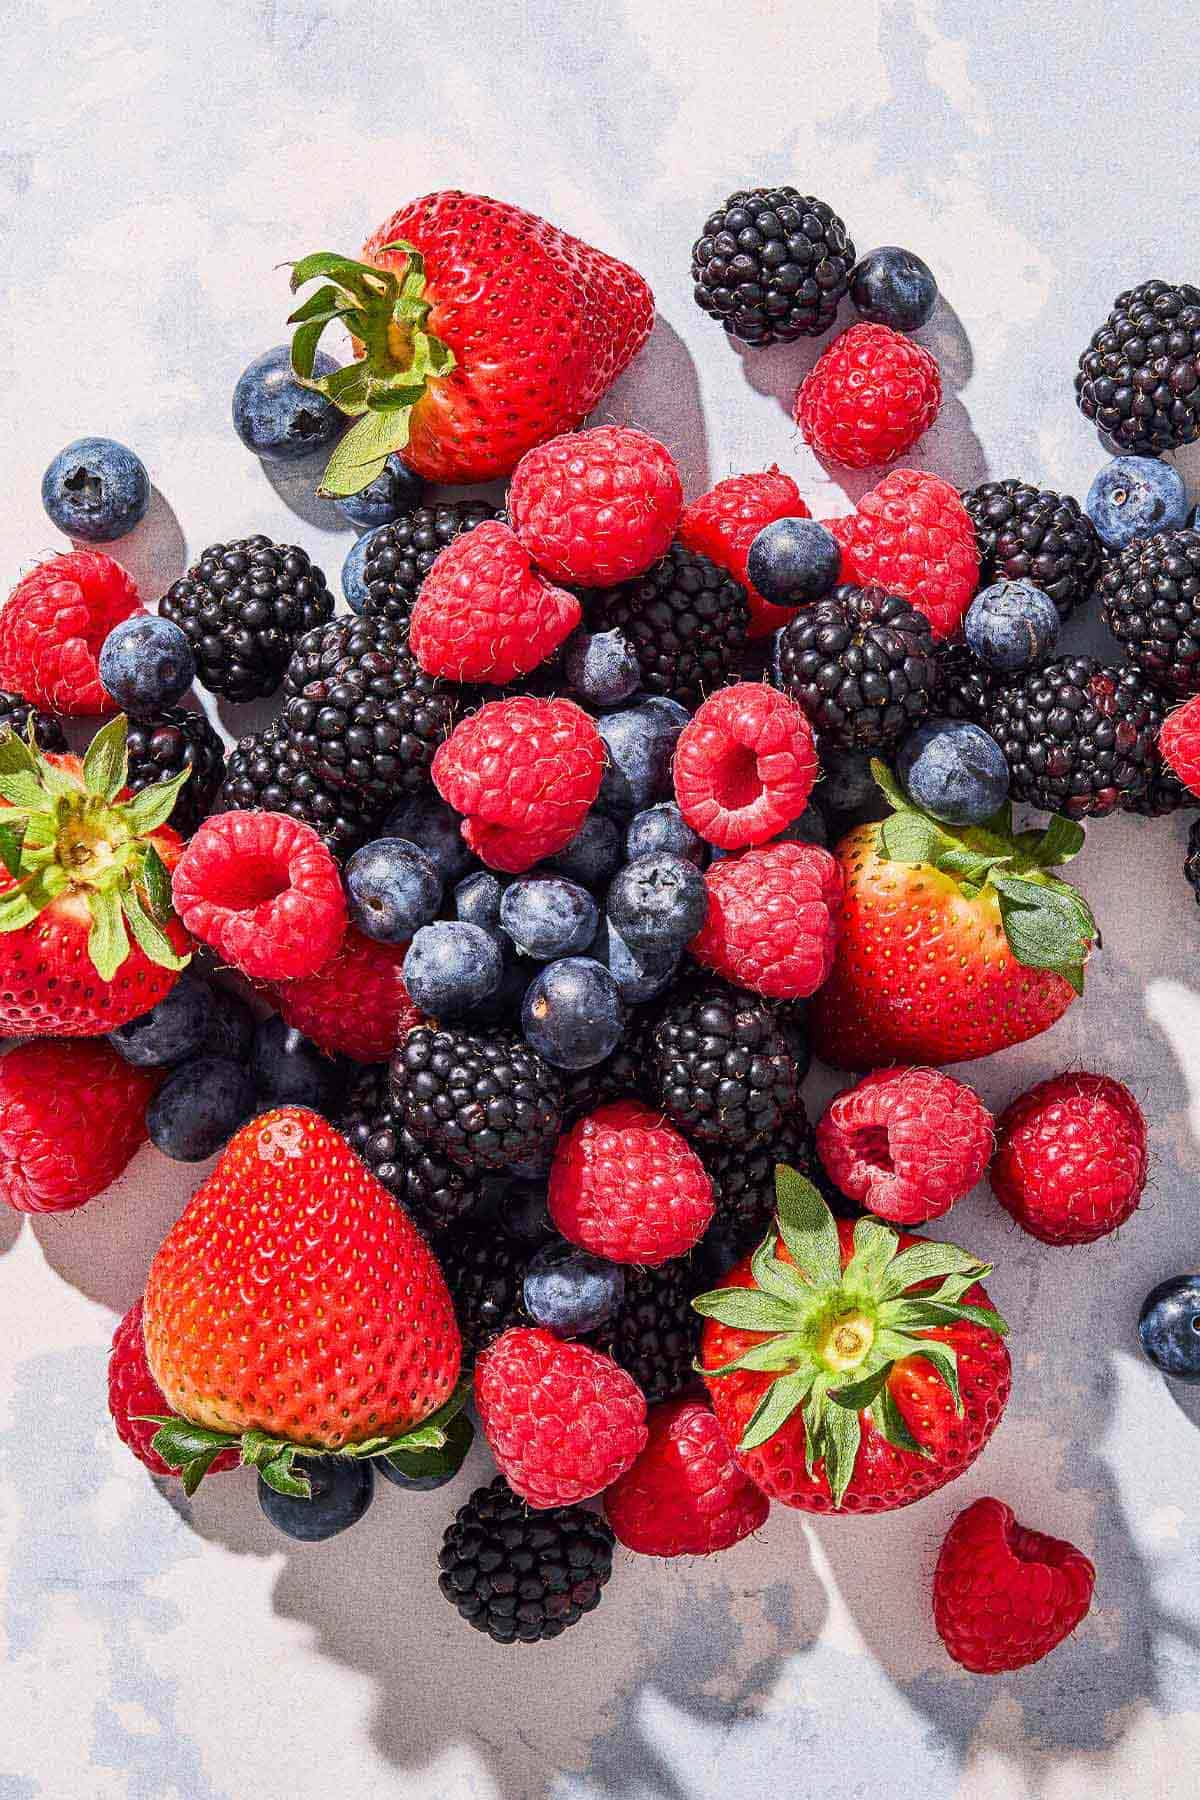 A close up of a blueberries, blackberries and strawberries.